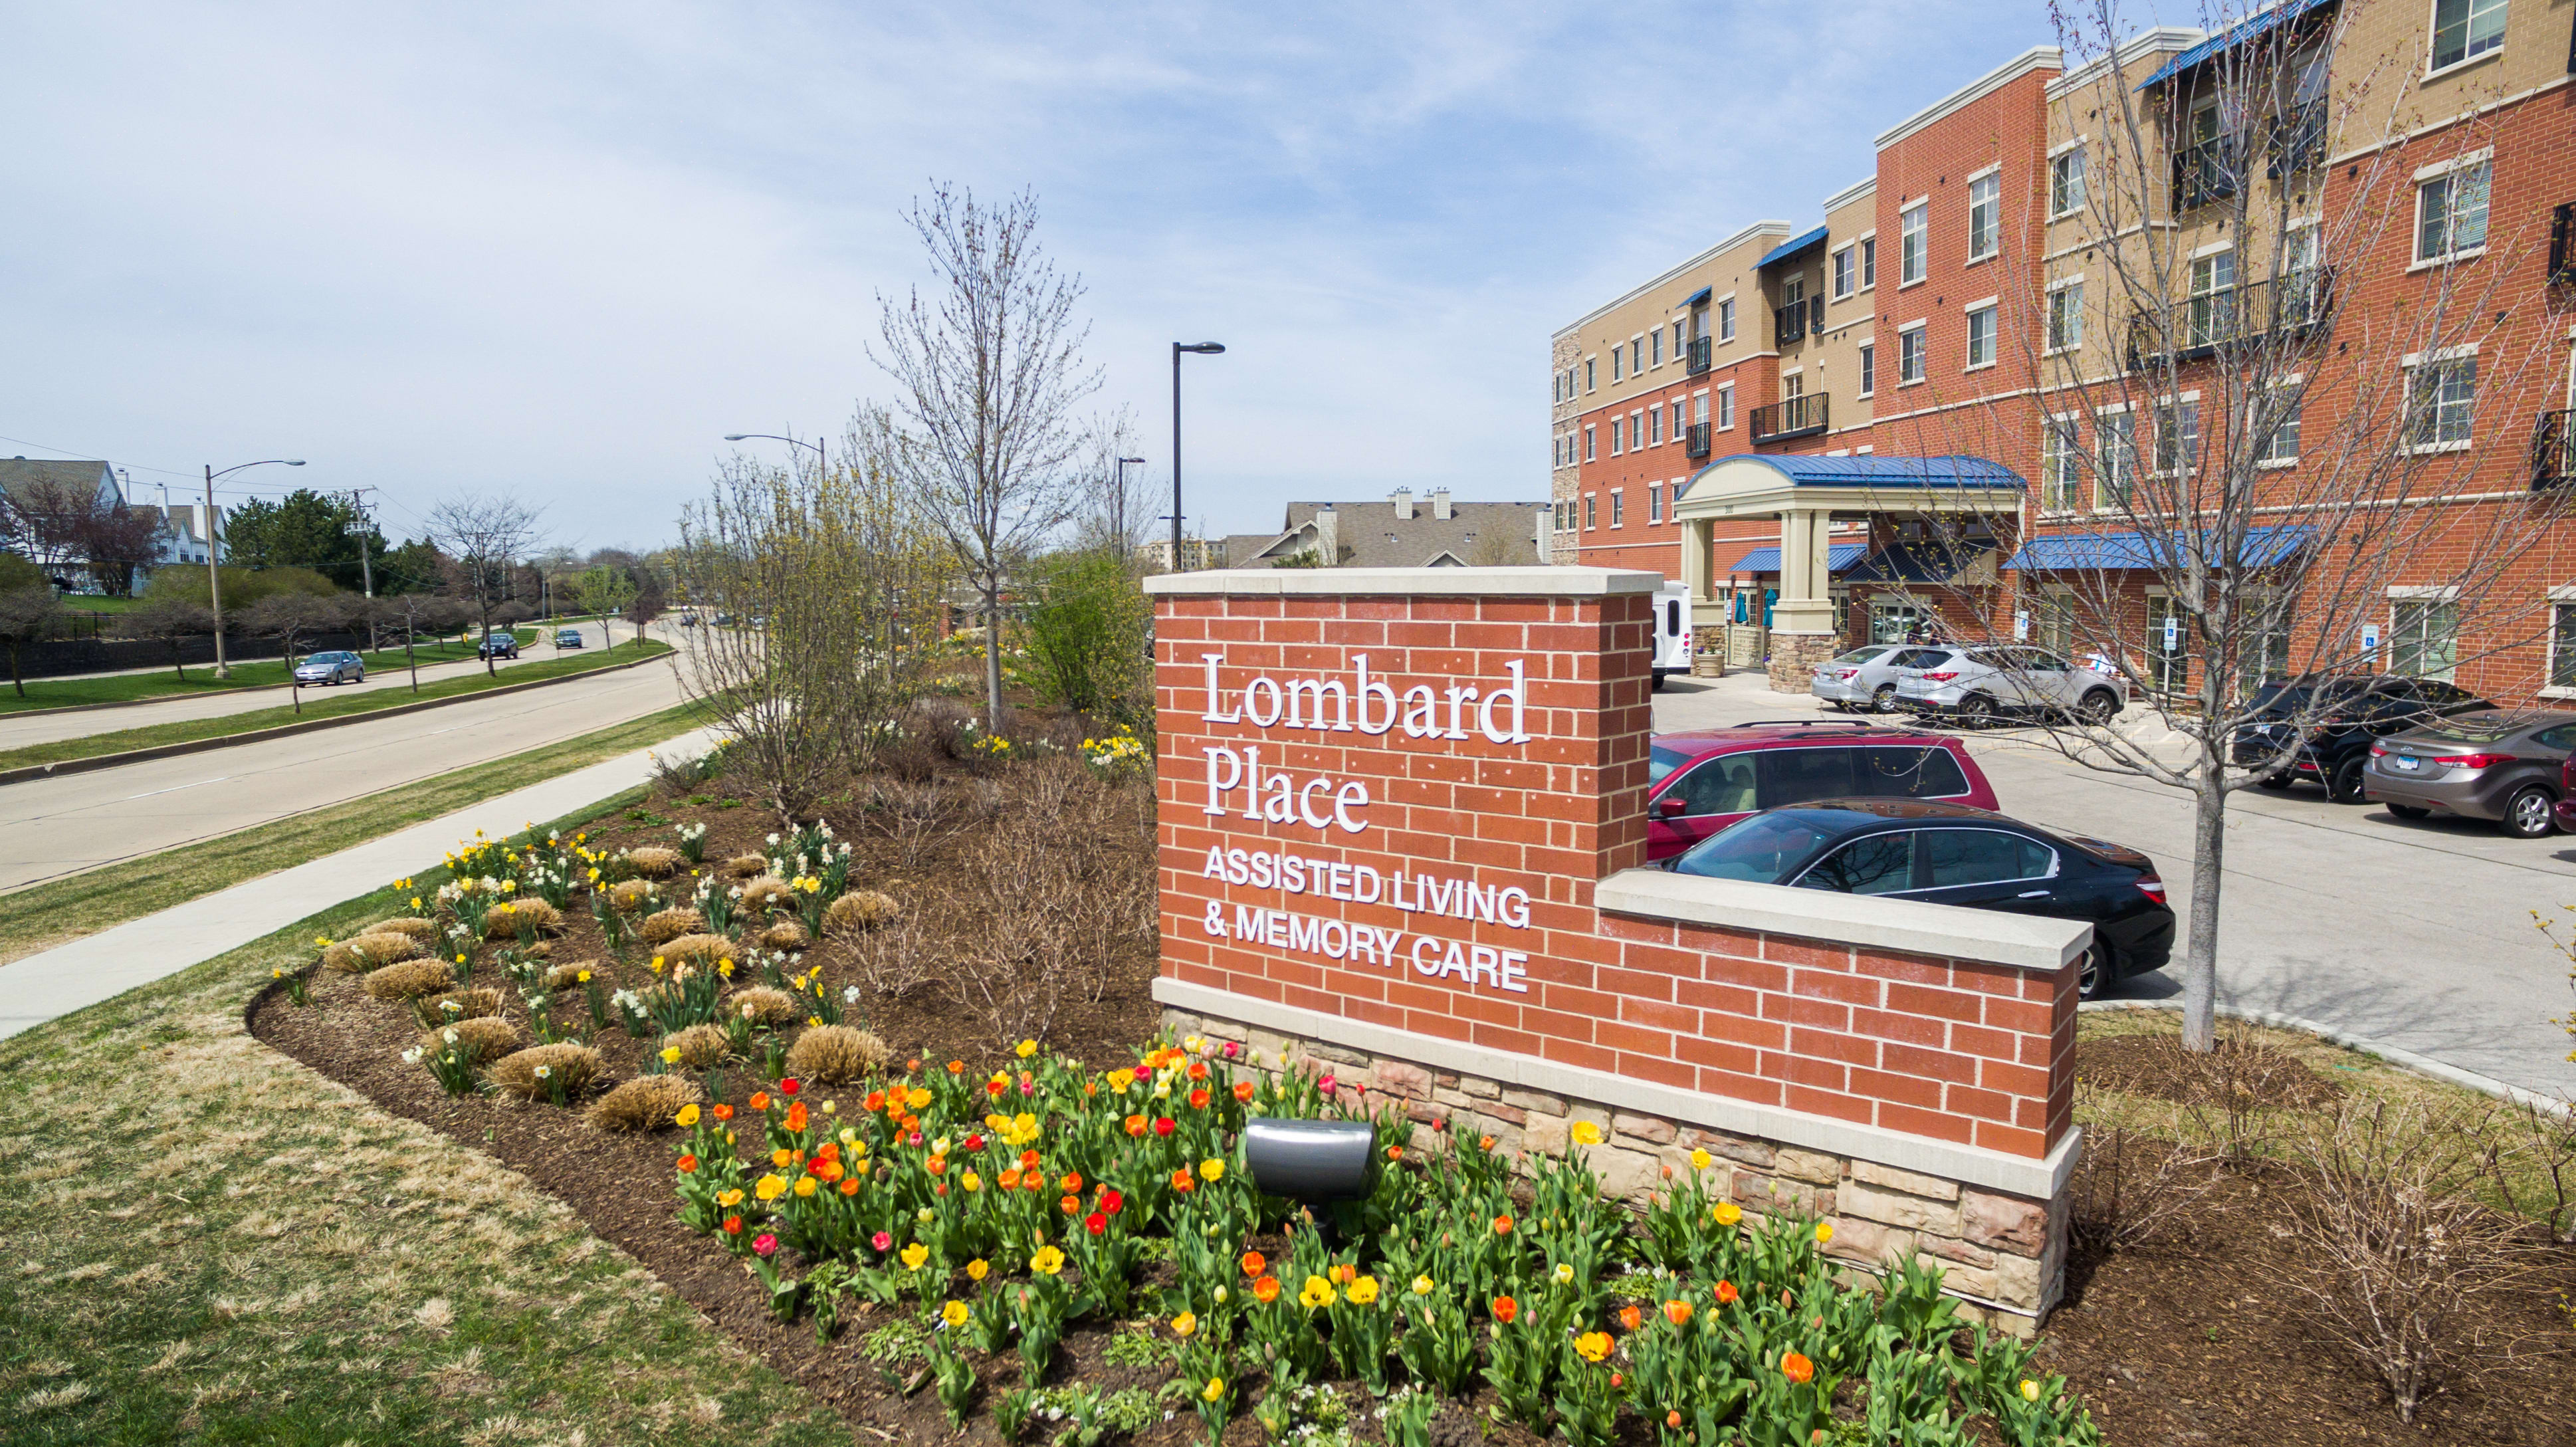 Lombard Place Assisted Living & Memory Care community exterior